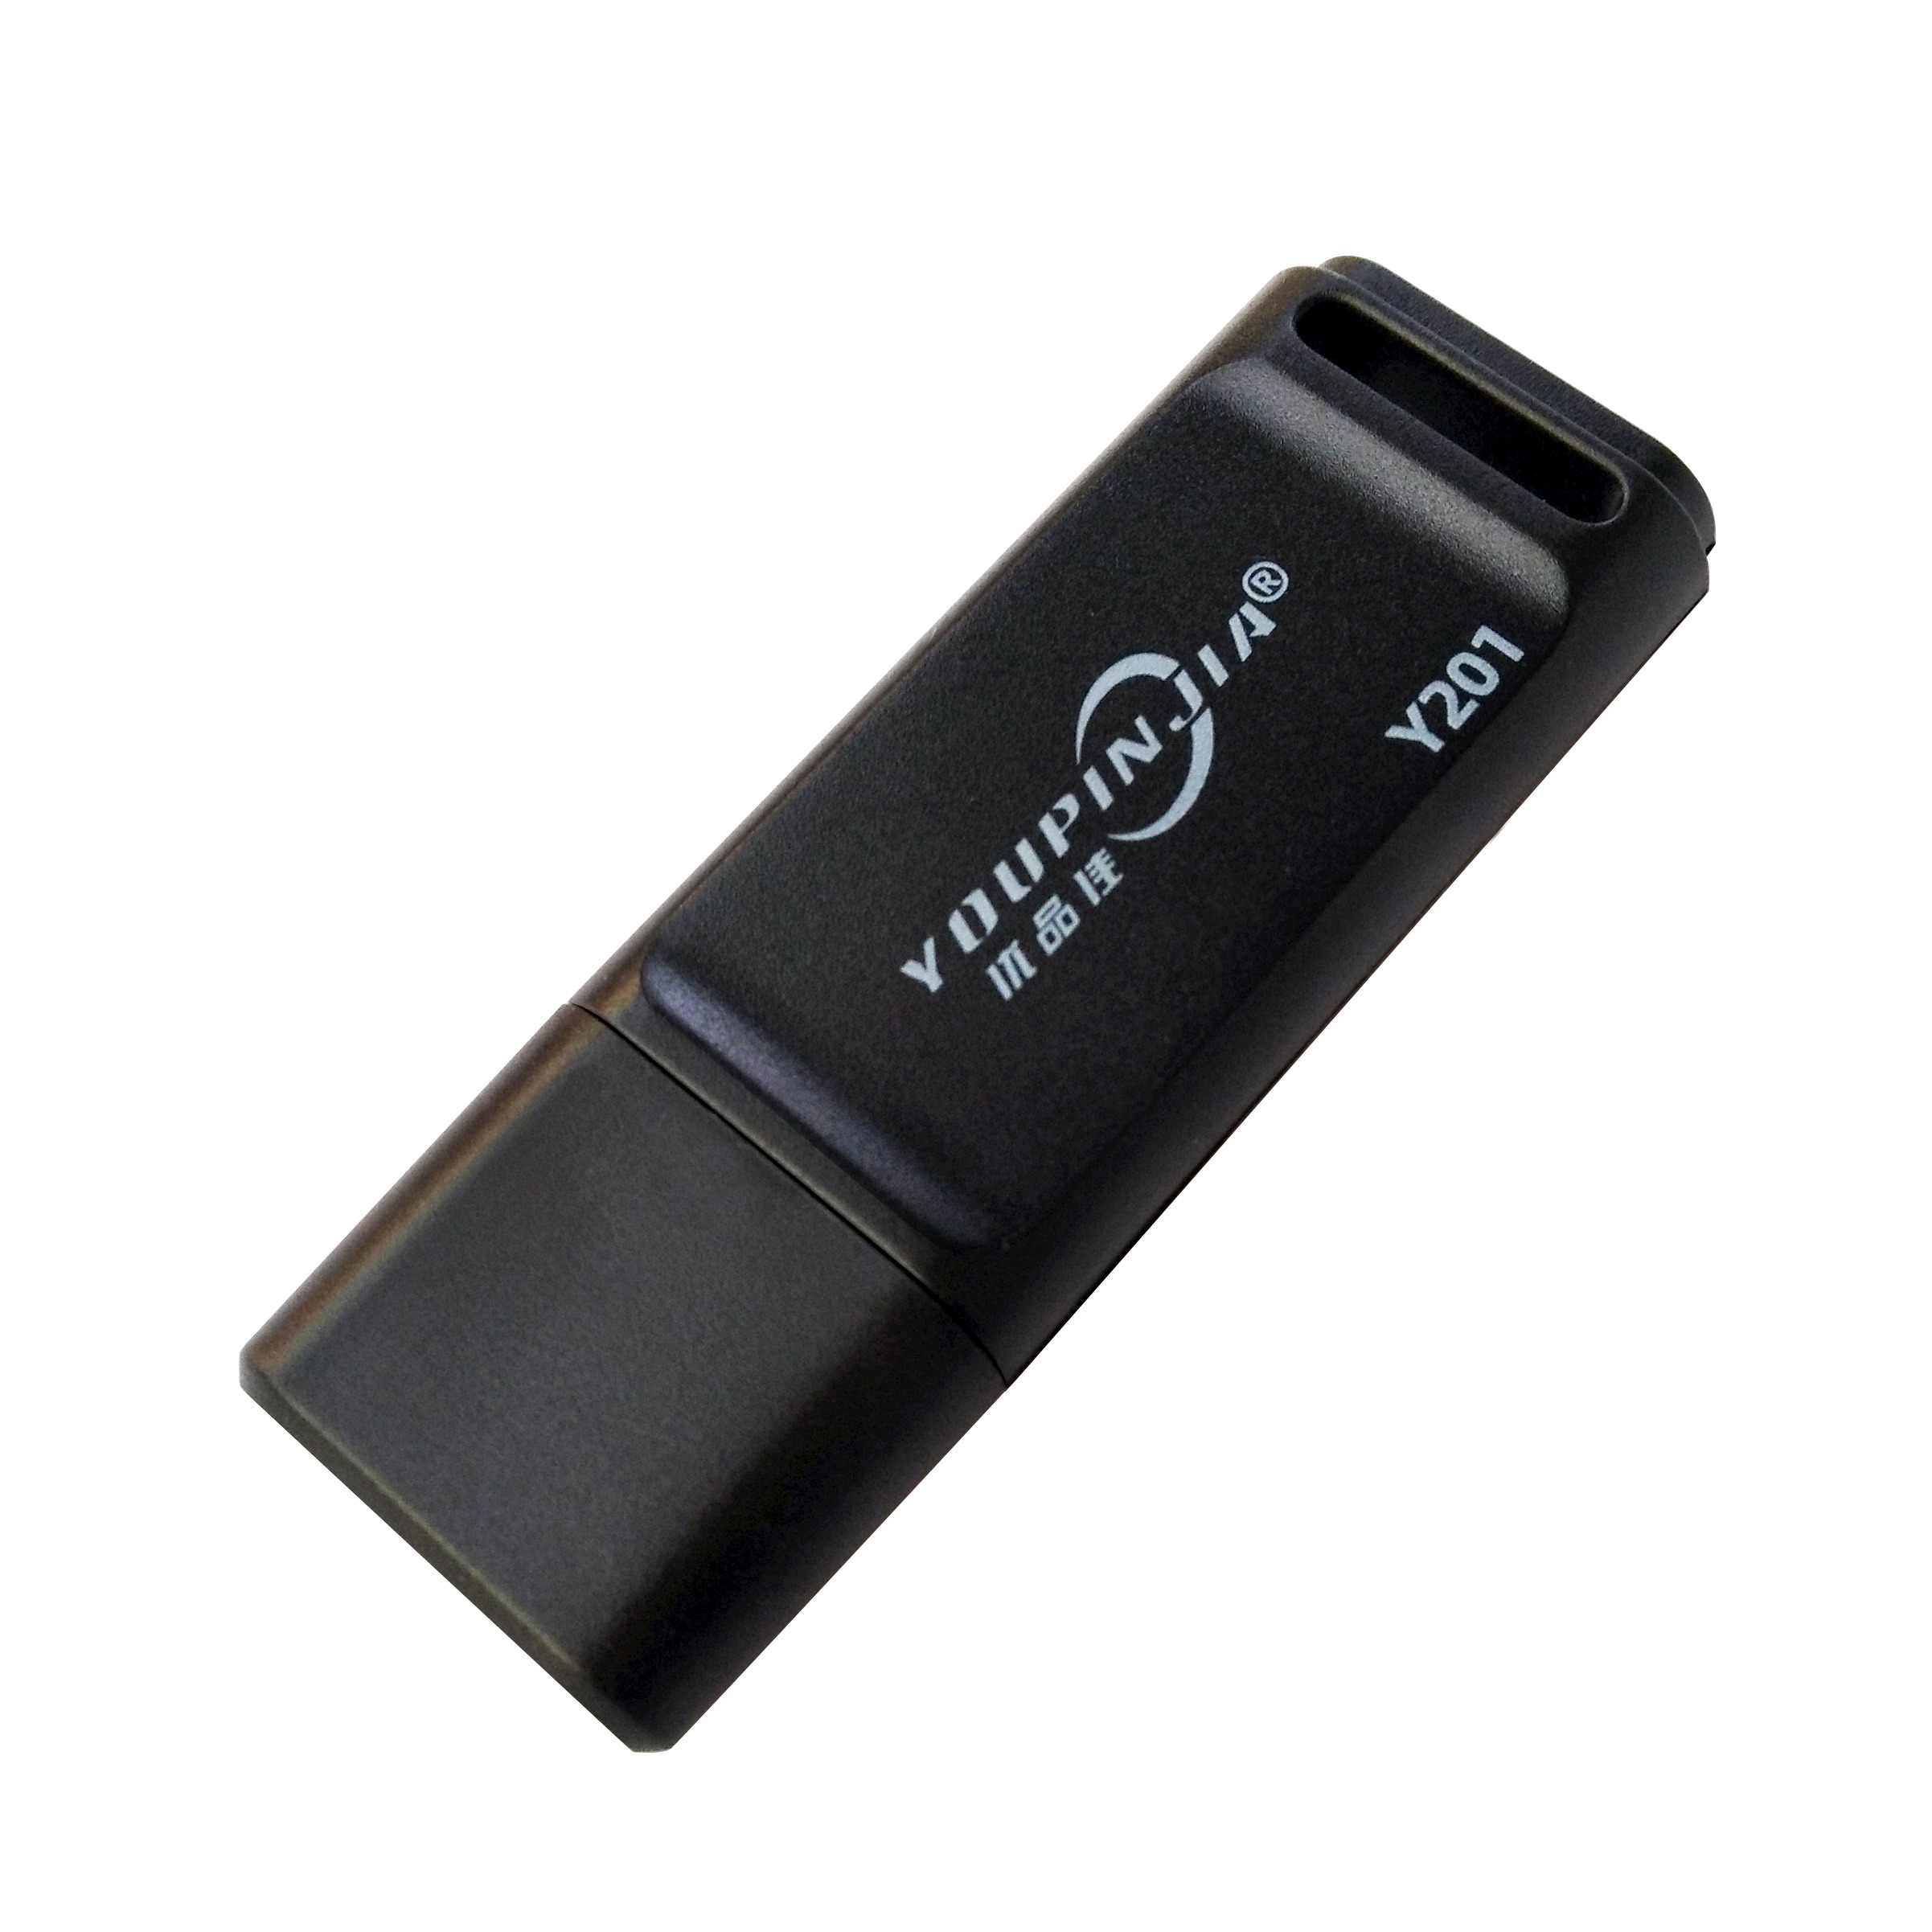 Find USB Flash Drive 32G PenDrive USB2 0 Disk Portable U Disk 64G Thumb Drive for PC Notebook Video Player Plug and Play Black Blue for Sale on Gipsybee.com with cryptocurrencies